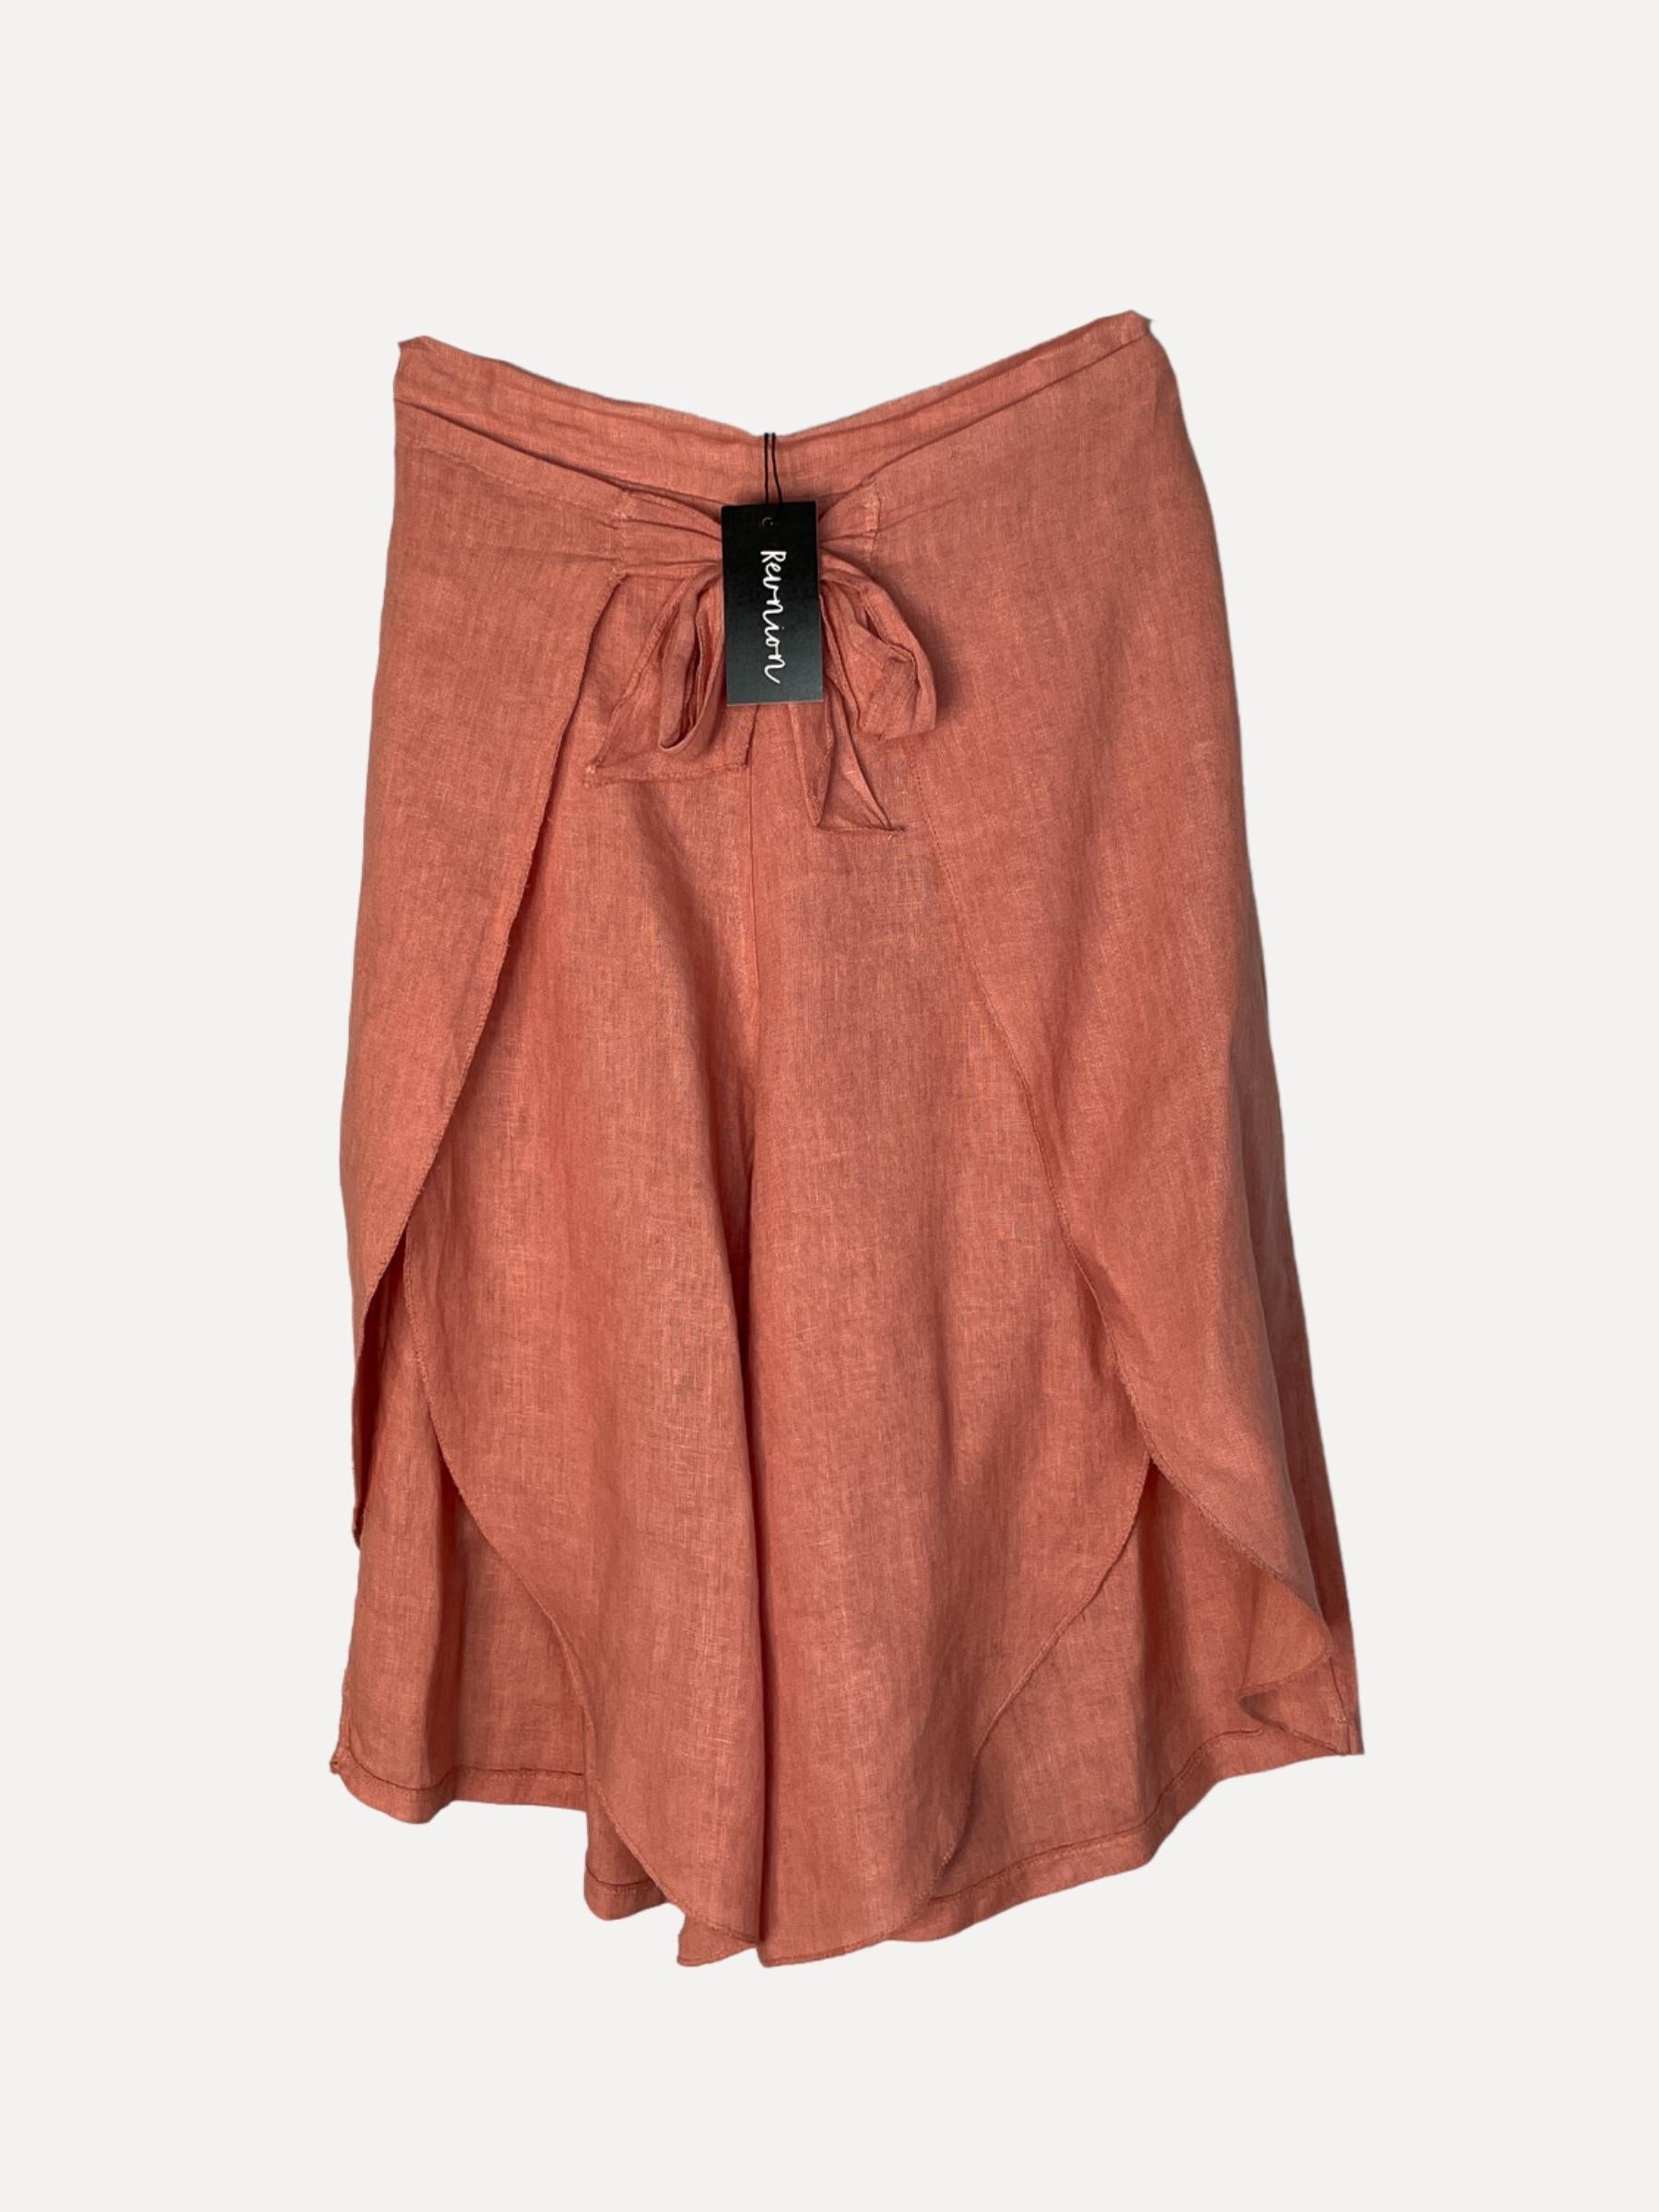 ORCHID Shorts, Caramelle Rose